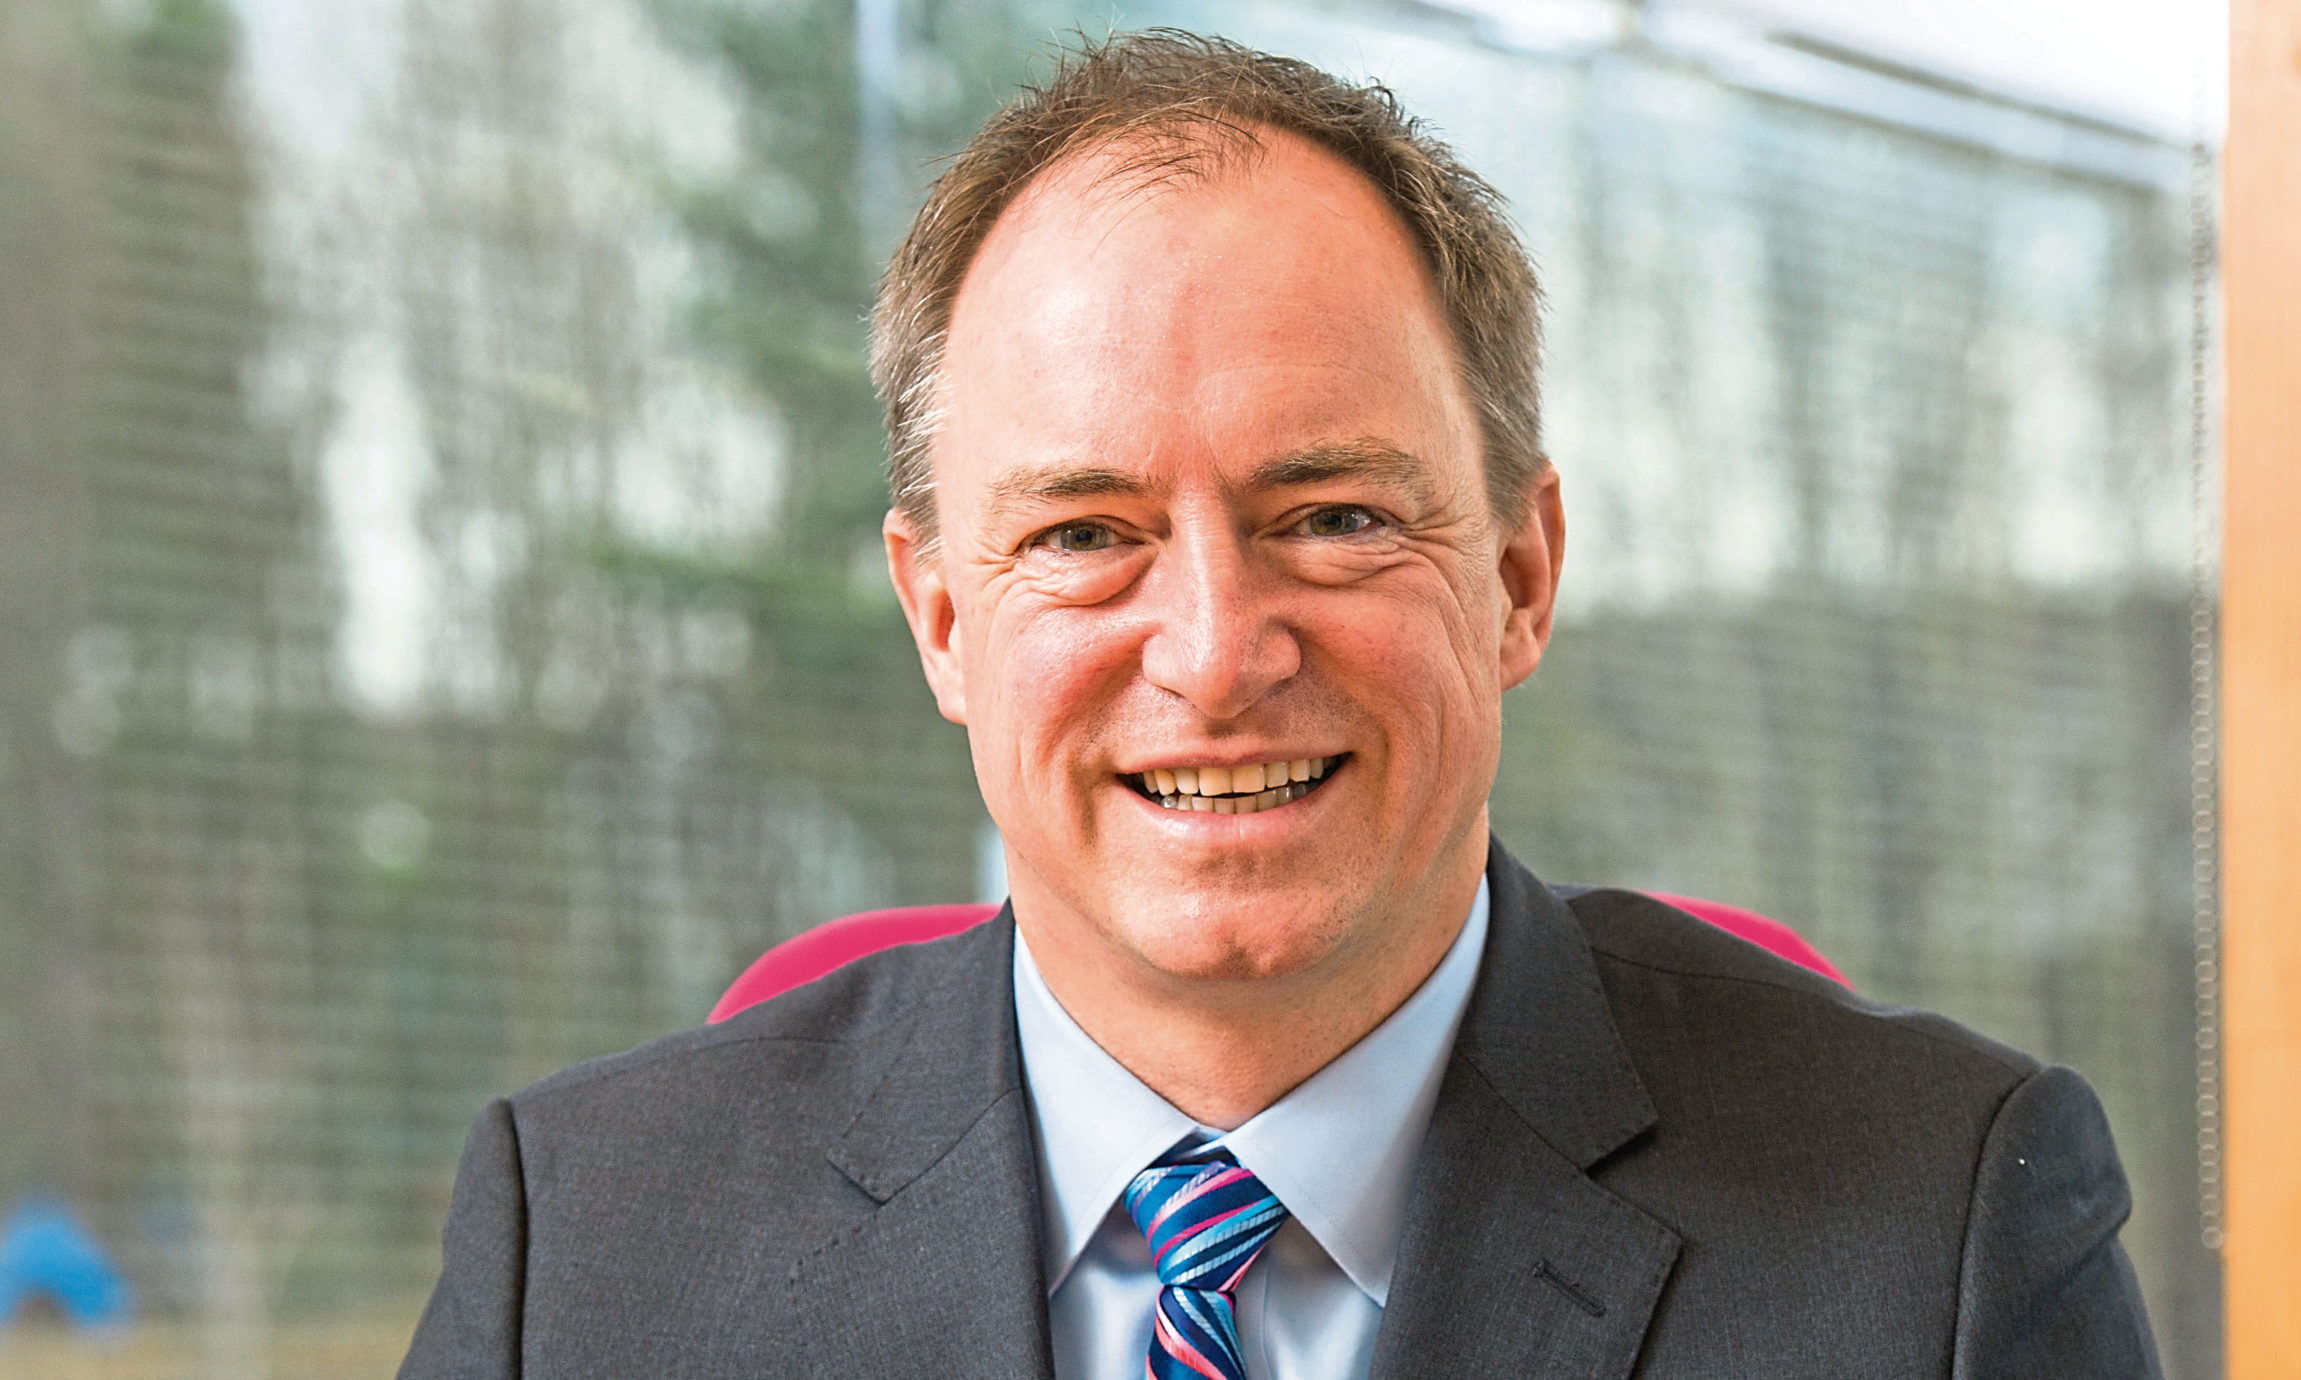 Andy Lothian, Group CEO and co-founder of Insights